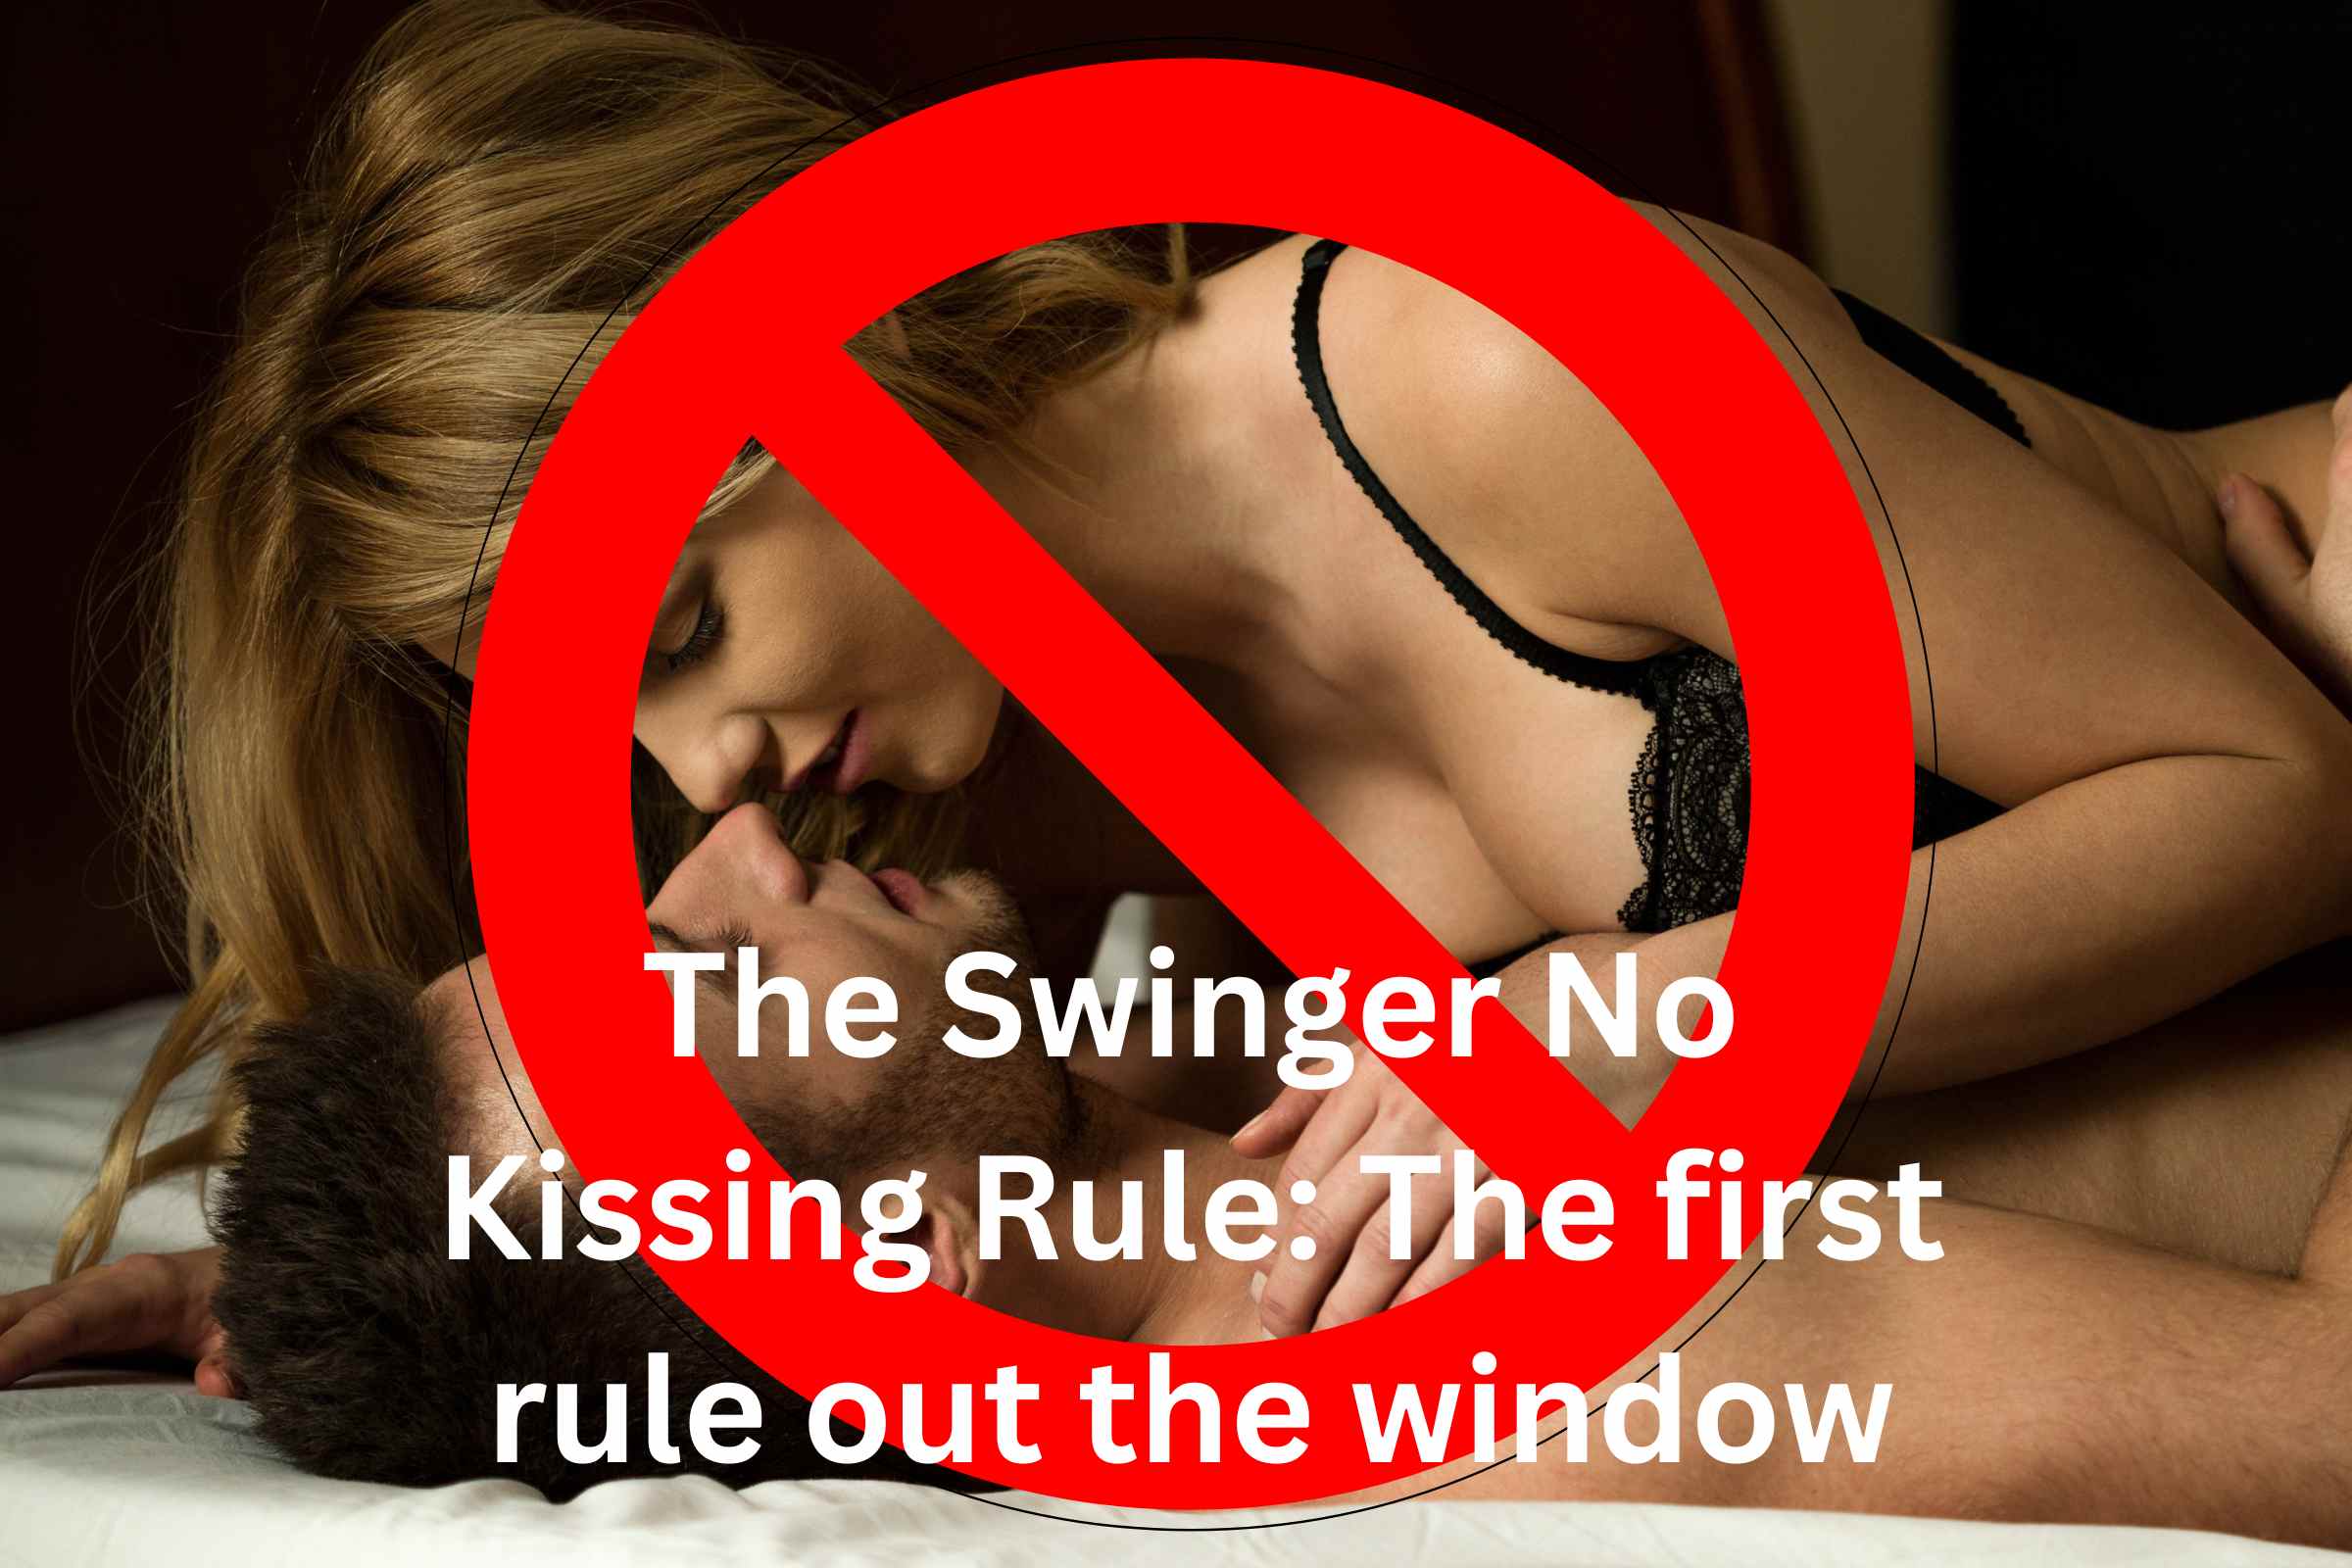 2023 The Swinger No Kissing Rule The first rule out the window pic picture